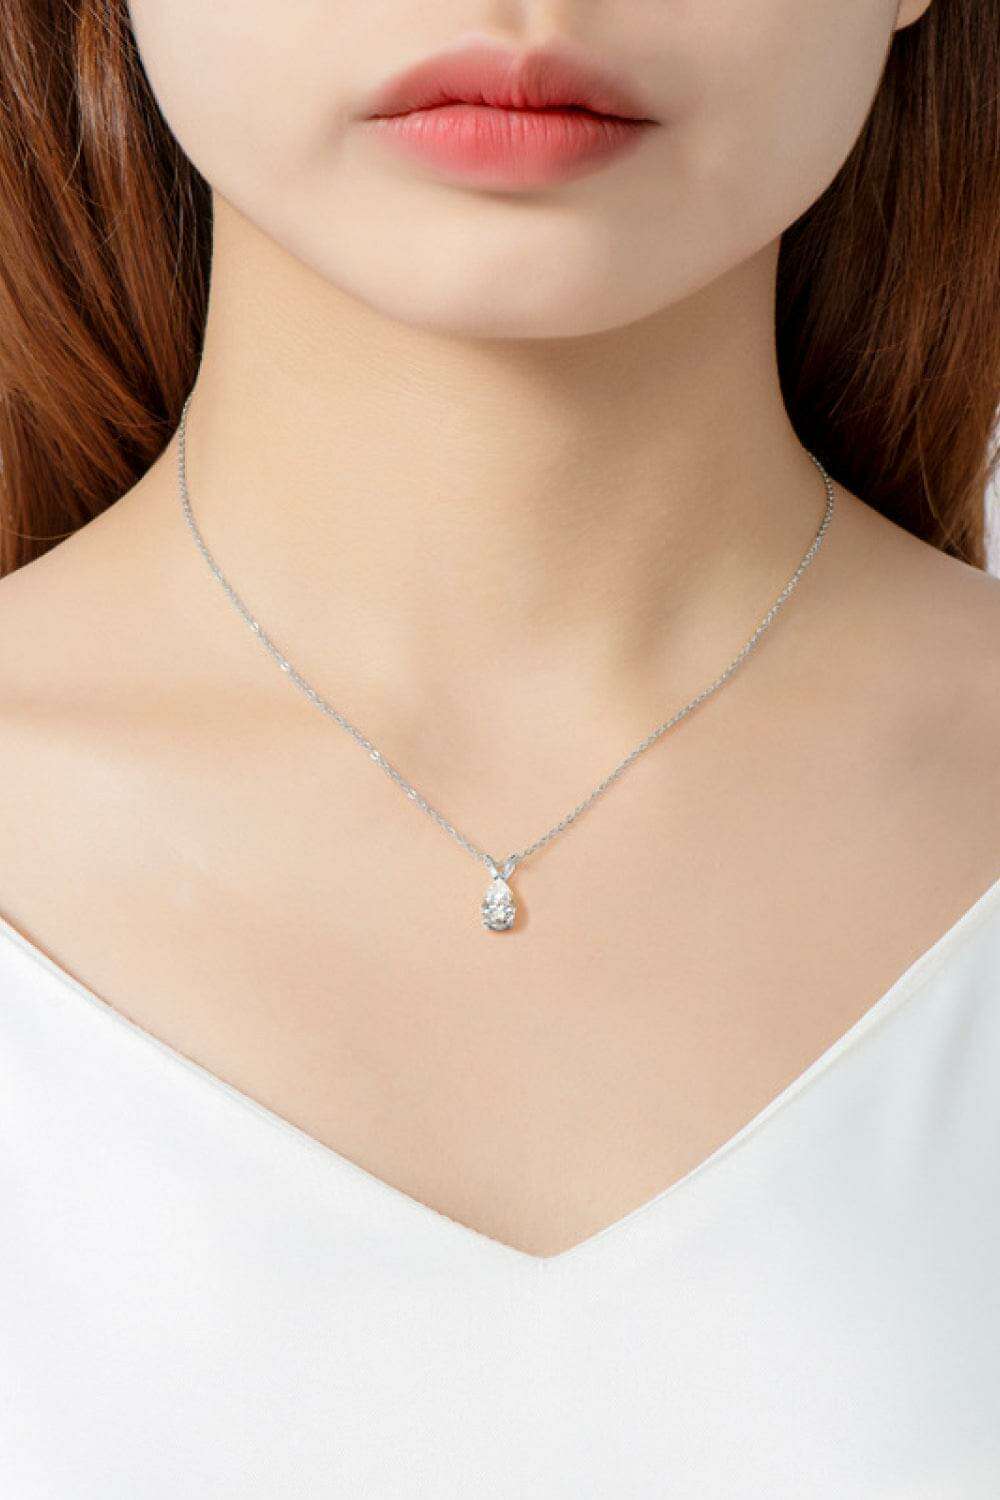 - 1.5 Carat Moissanite Pendant 925 Sterling Silver Necklace - gold or silver - necklace at TFC&H Co.